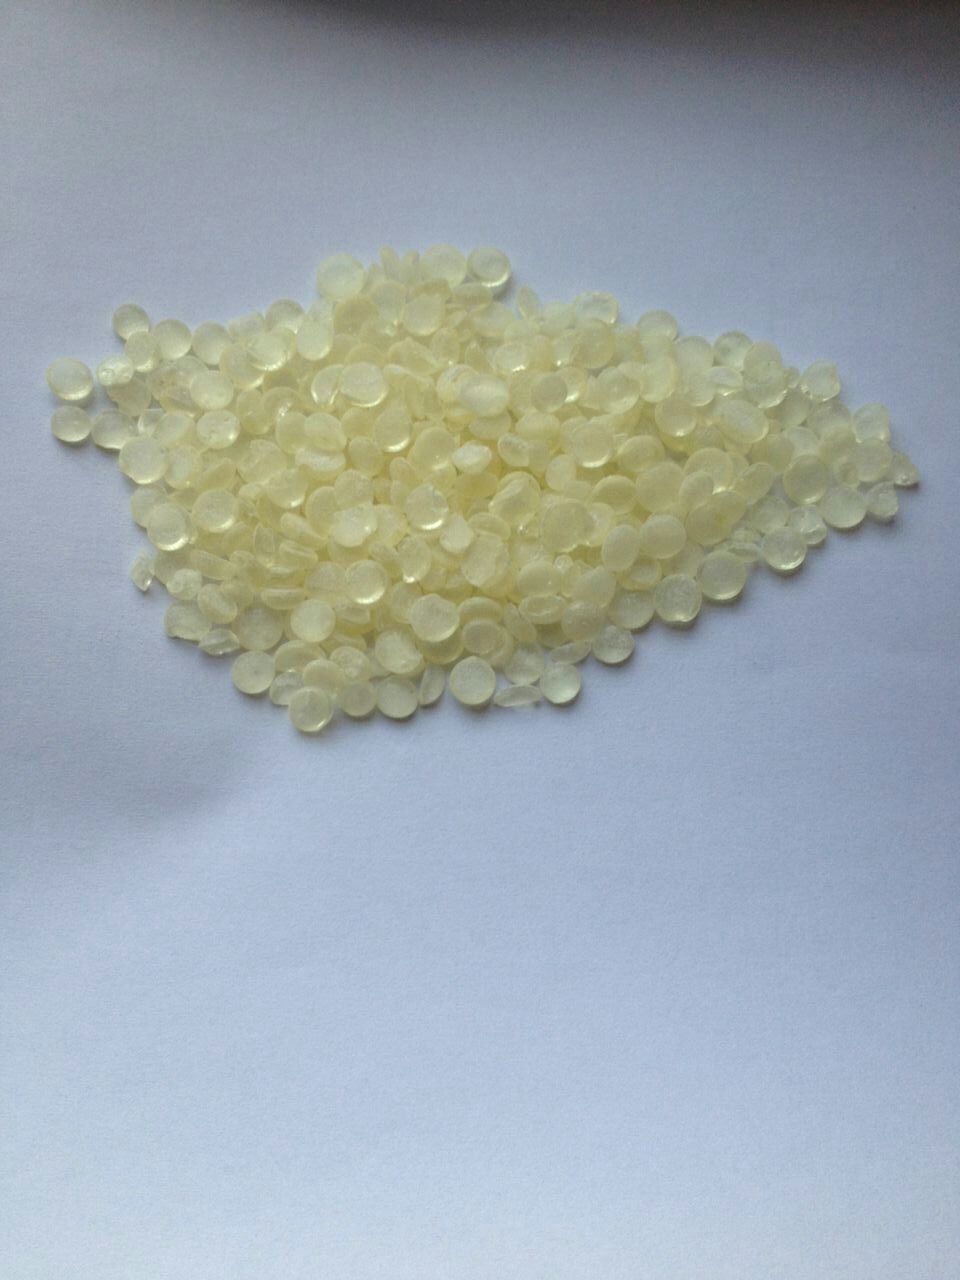 C5 Hydrocarbon Resin for Thermoplastic Road Marking Material